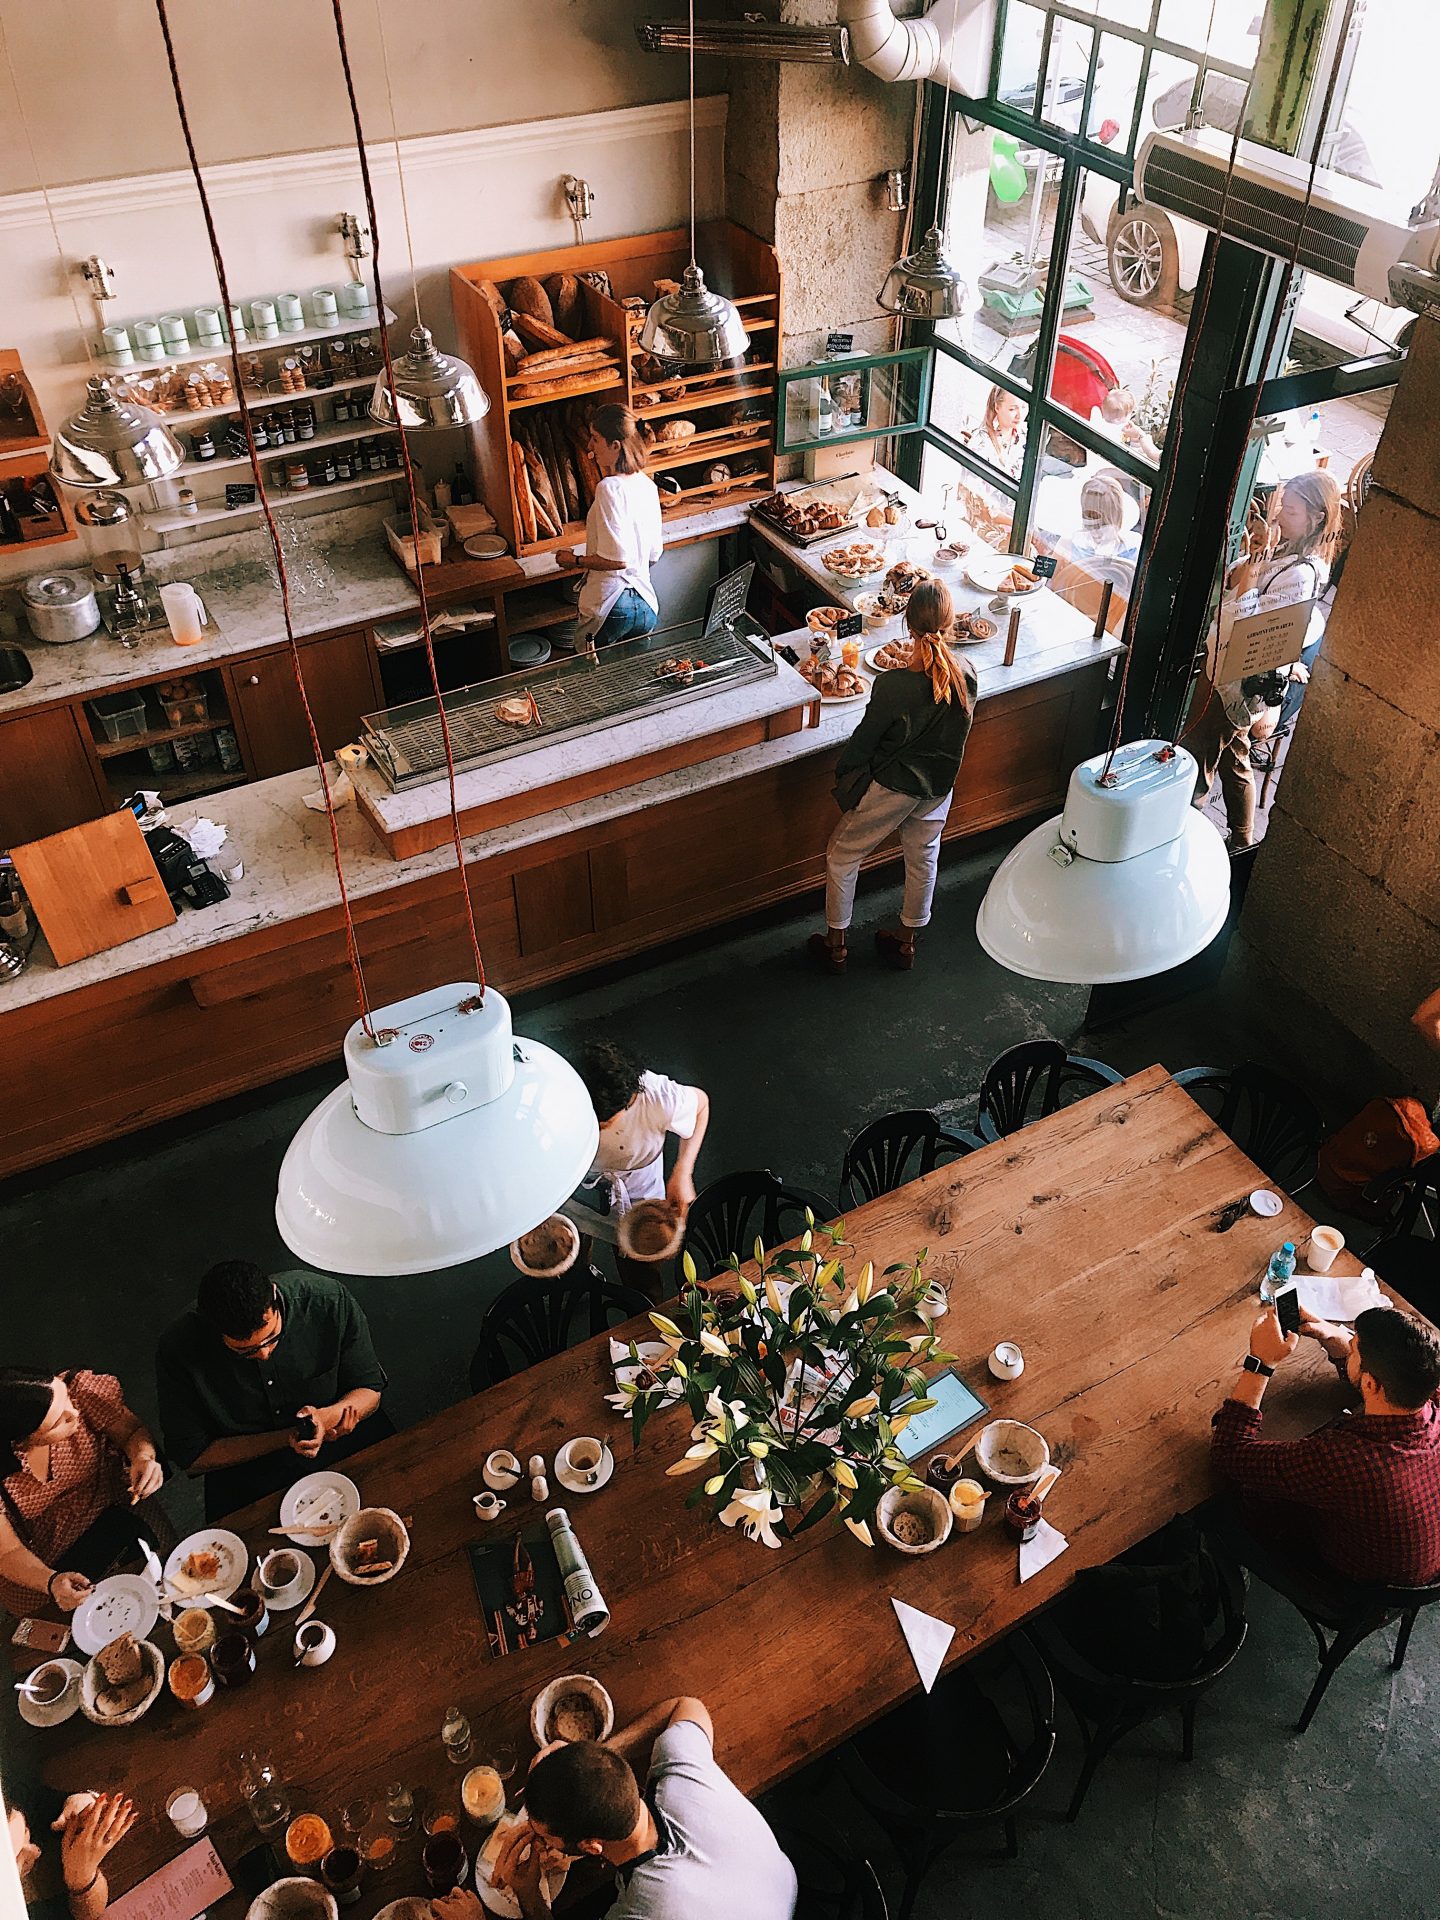 6 Ways to Improve the Customer Experience at Your Restaurant